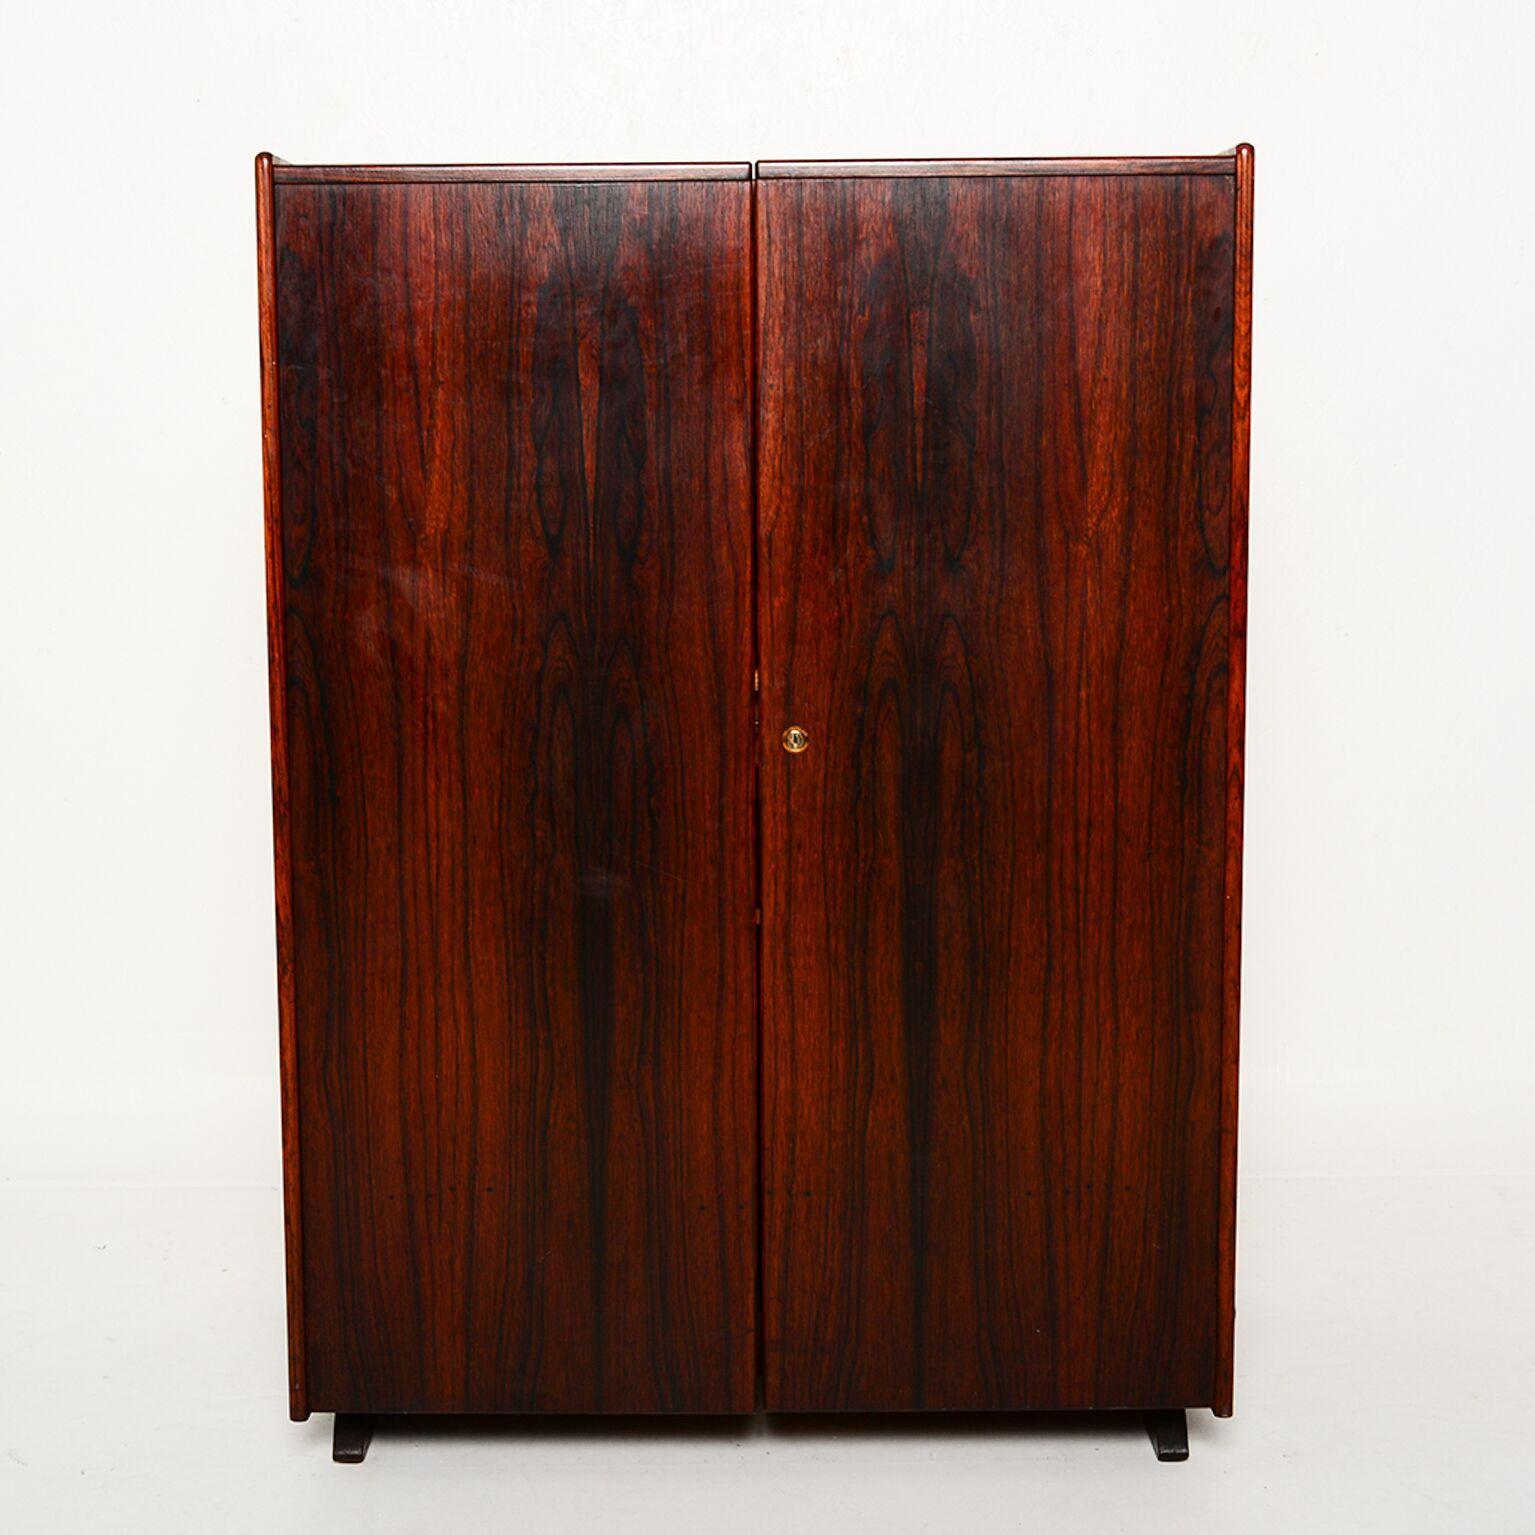 For your consideration a very rare and hard to find hideaway desk in exotic rosewood. When the desk is closed it shows a nice cabinet beautifully finished with exotic rosewood. Once you open the desk, the pull-out area showcases a large writing area